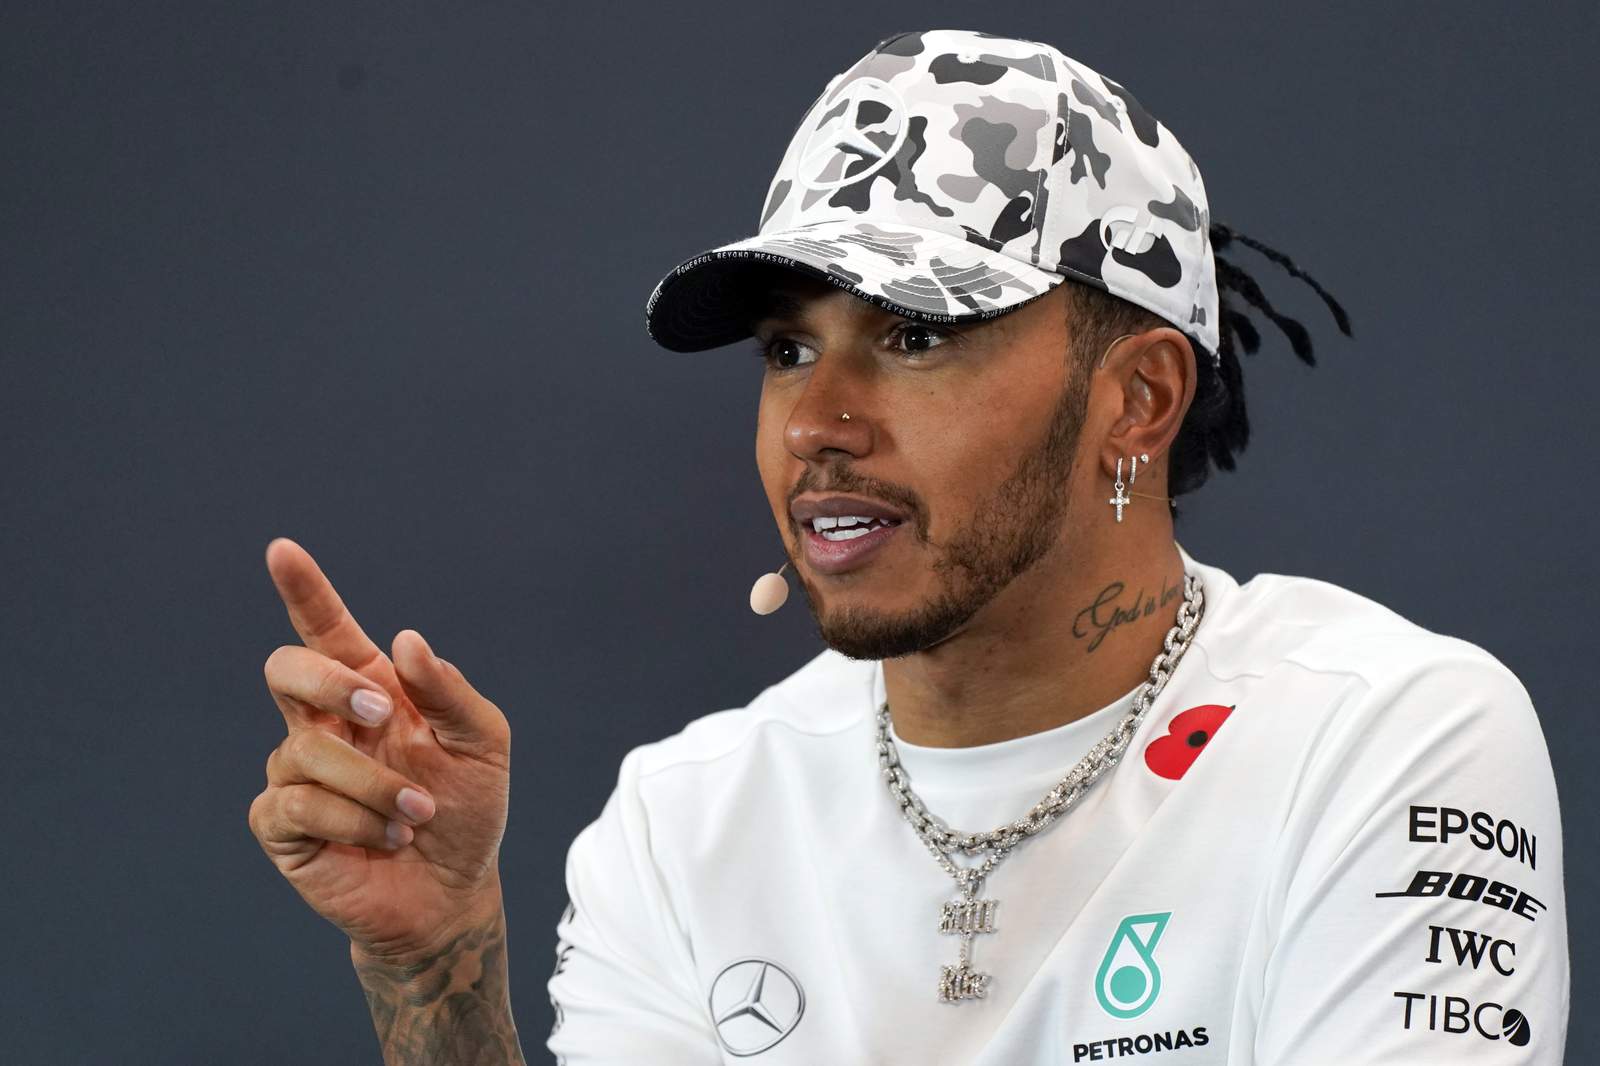 F1 star Hamilton to set up commission to increase diversity